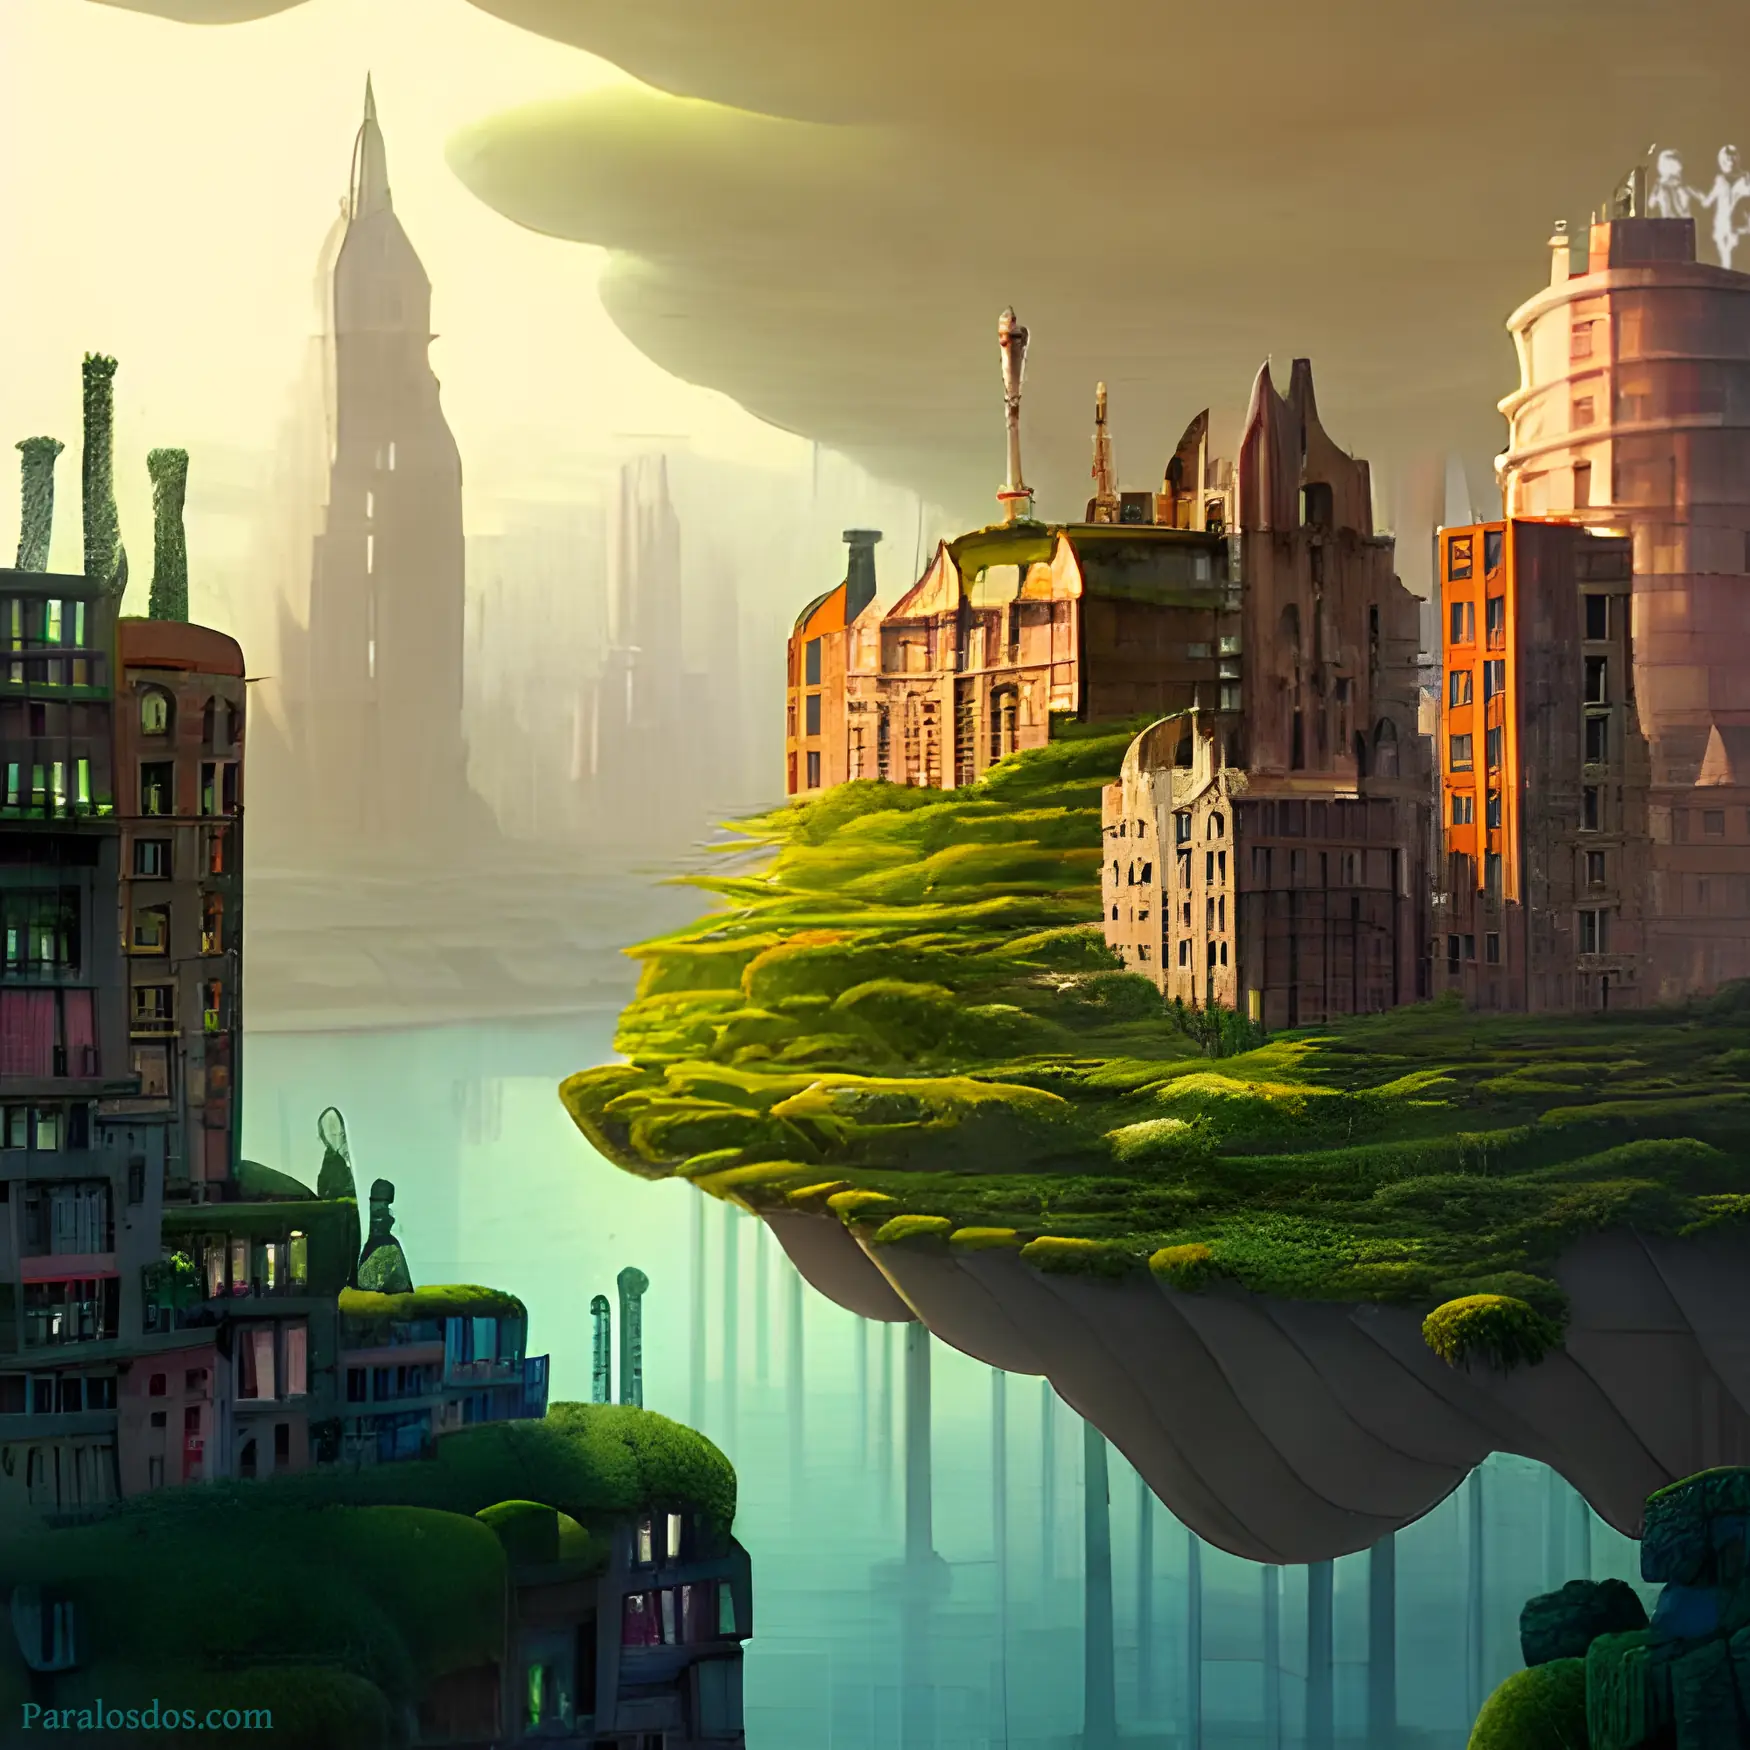 A fantastical rendering of a city that appears to be floating in the air.